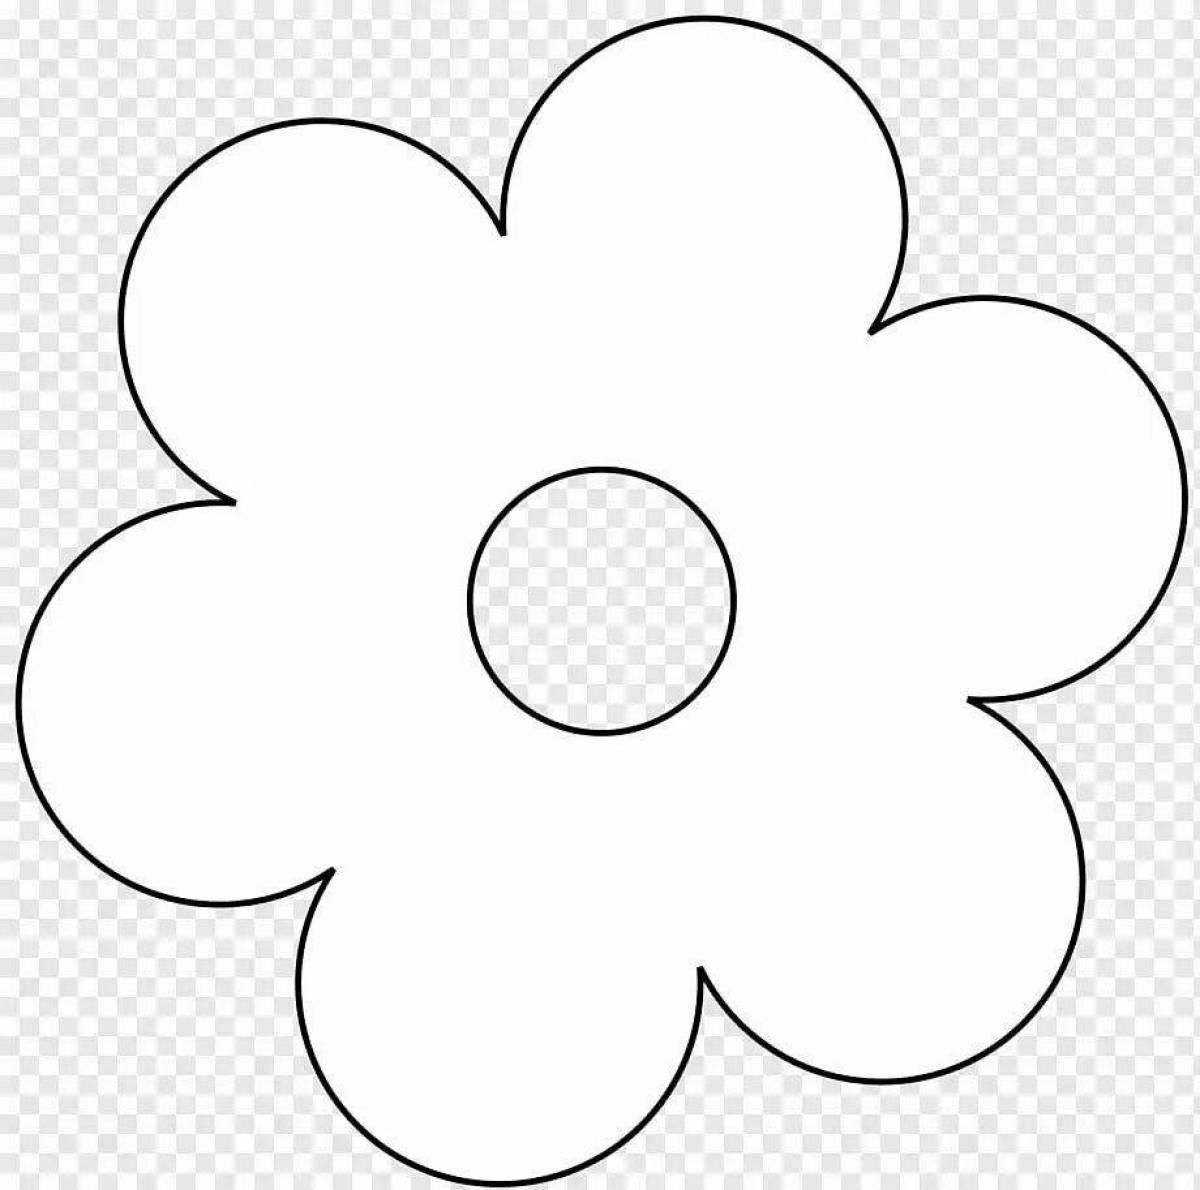 Exquisite flower pattern coloring book